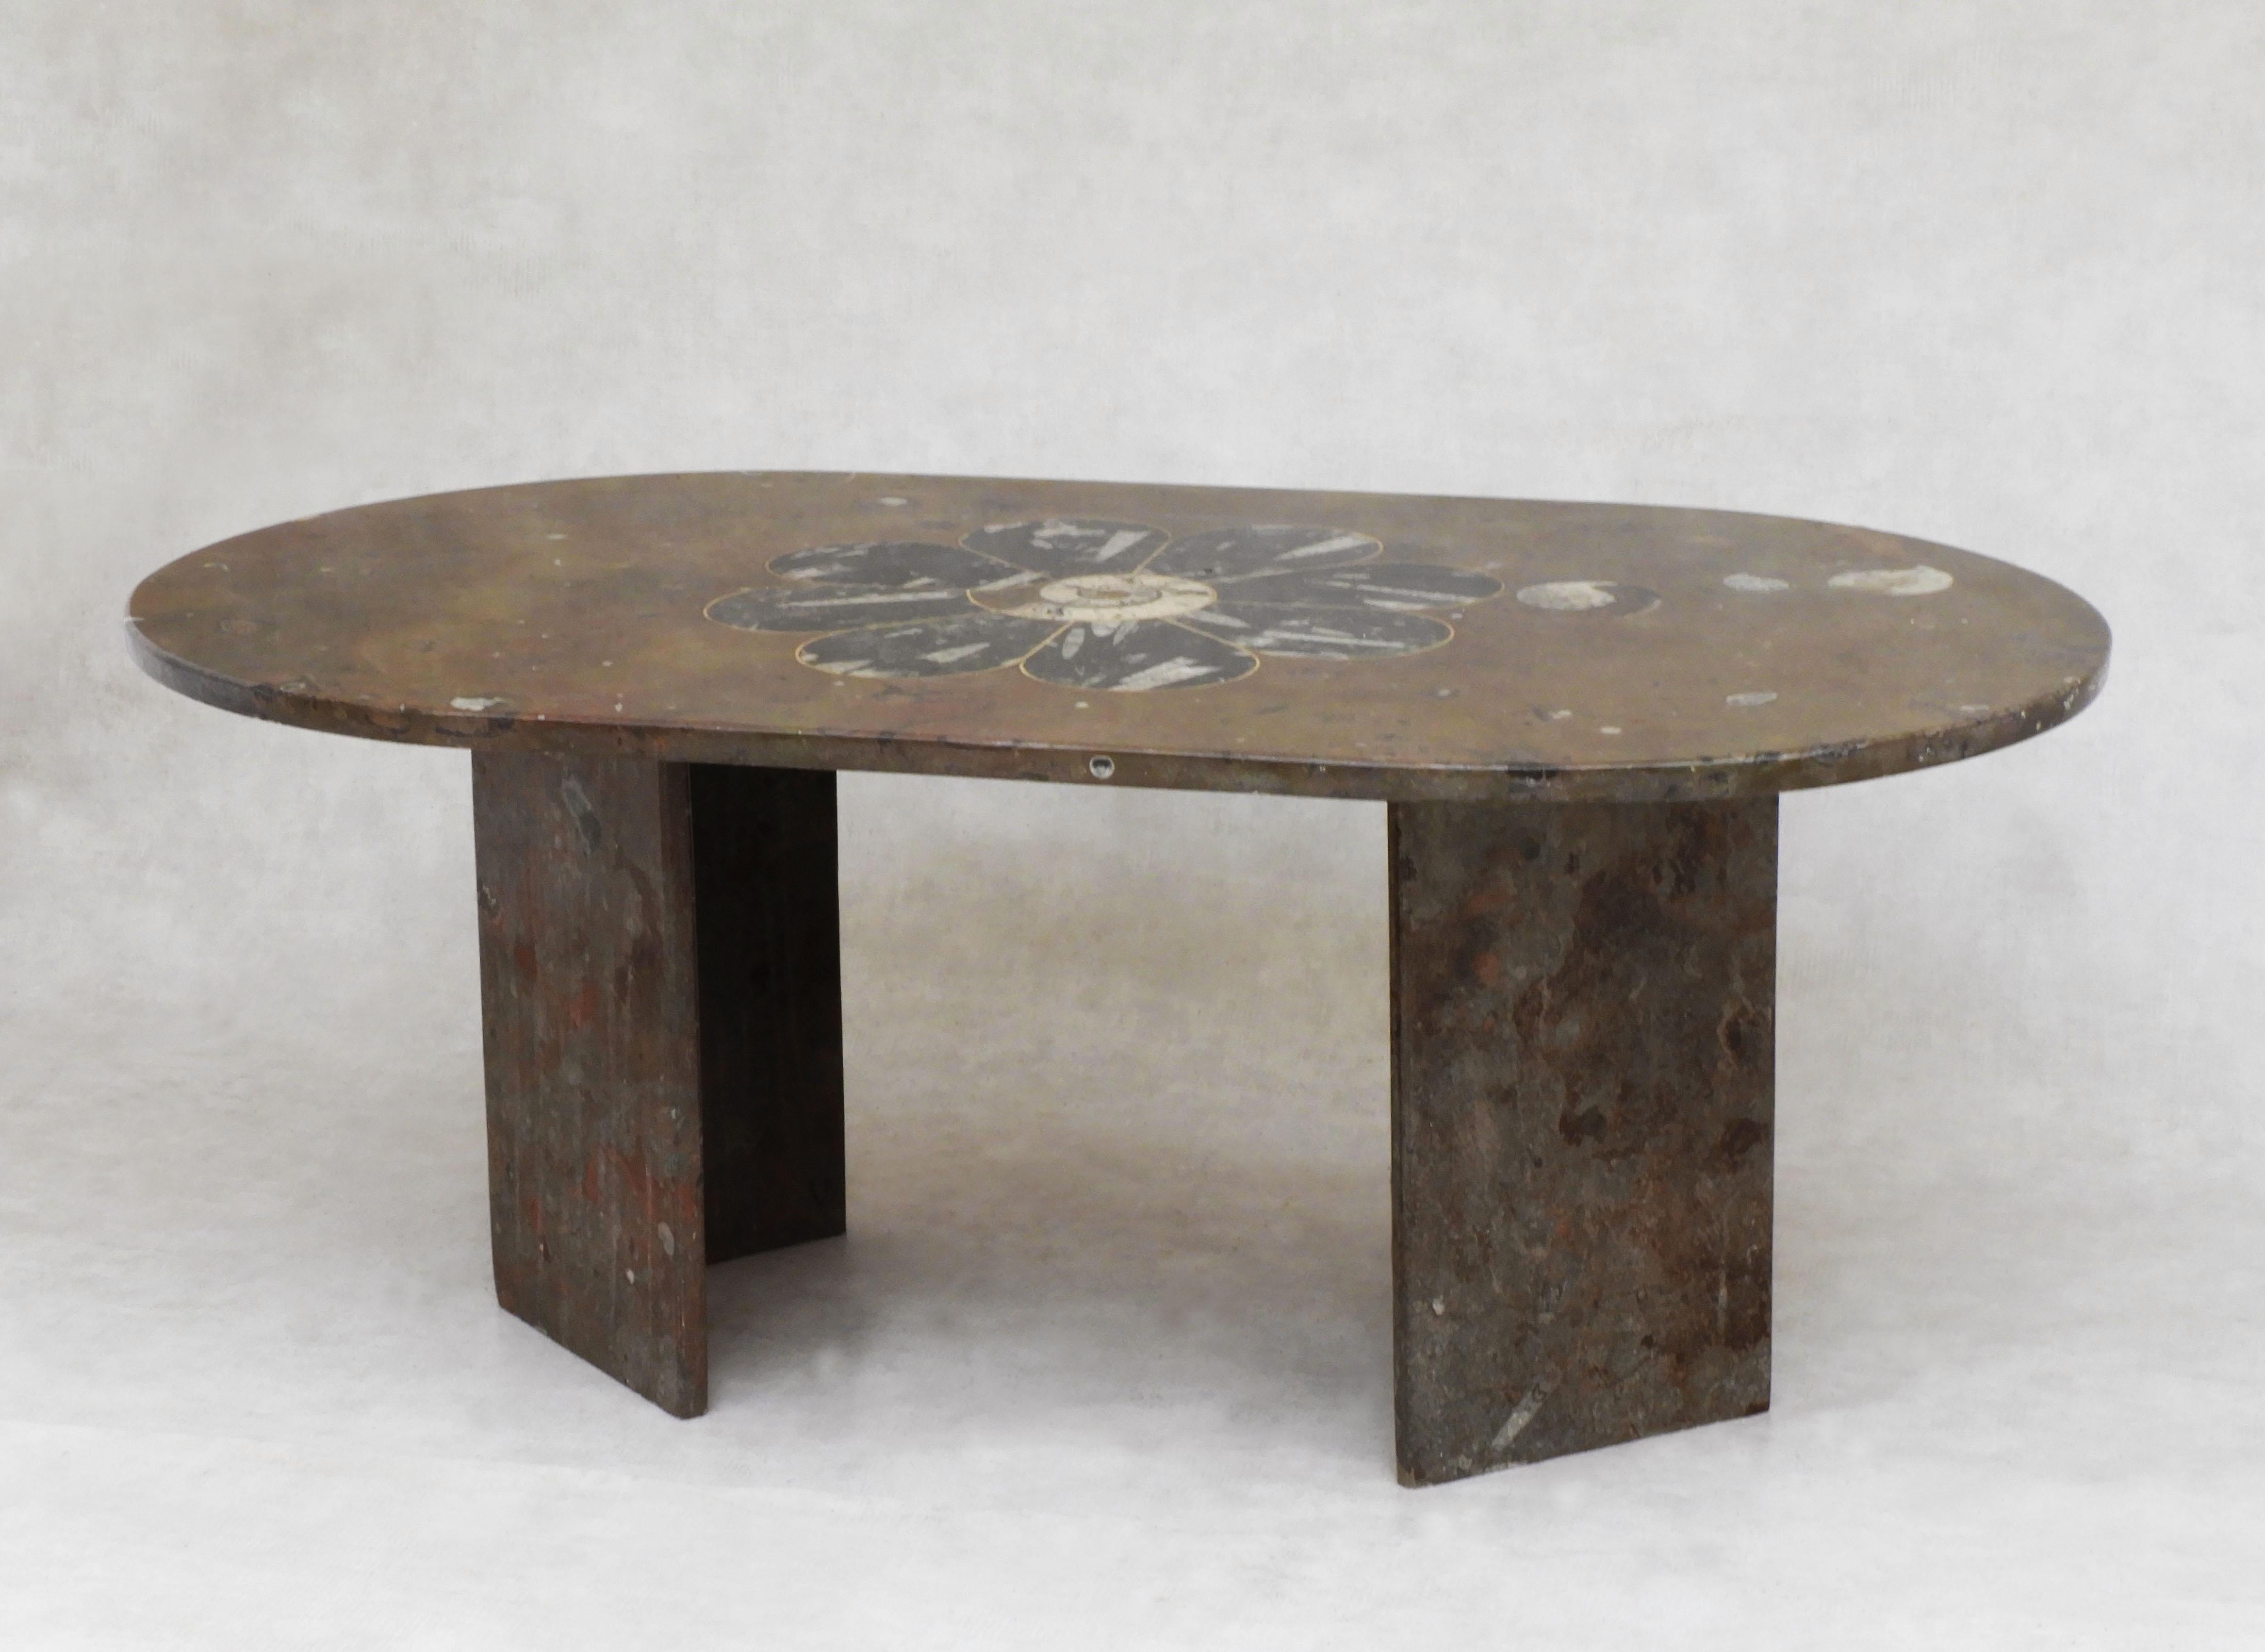 An eye-catching and unusual marble fossil coffee table from 1970s France.  Morrocan earth-toned marble embedded with ammonite and orthoceras fossils and accented with brass inlay in the form of an eight-petaled bloom. Commissioned in the 1970s, the